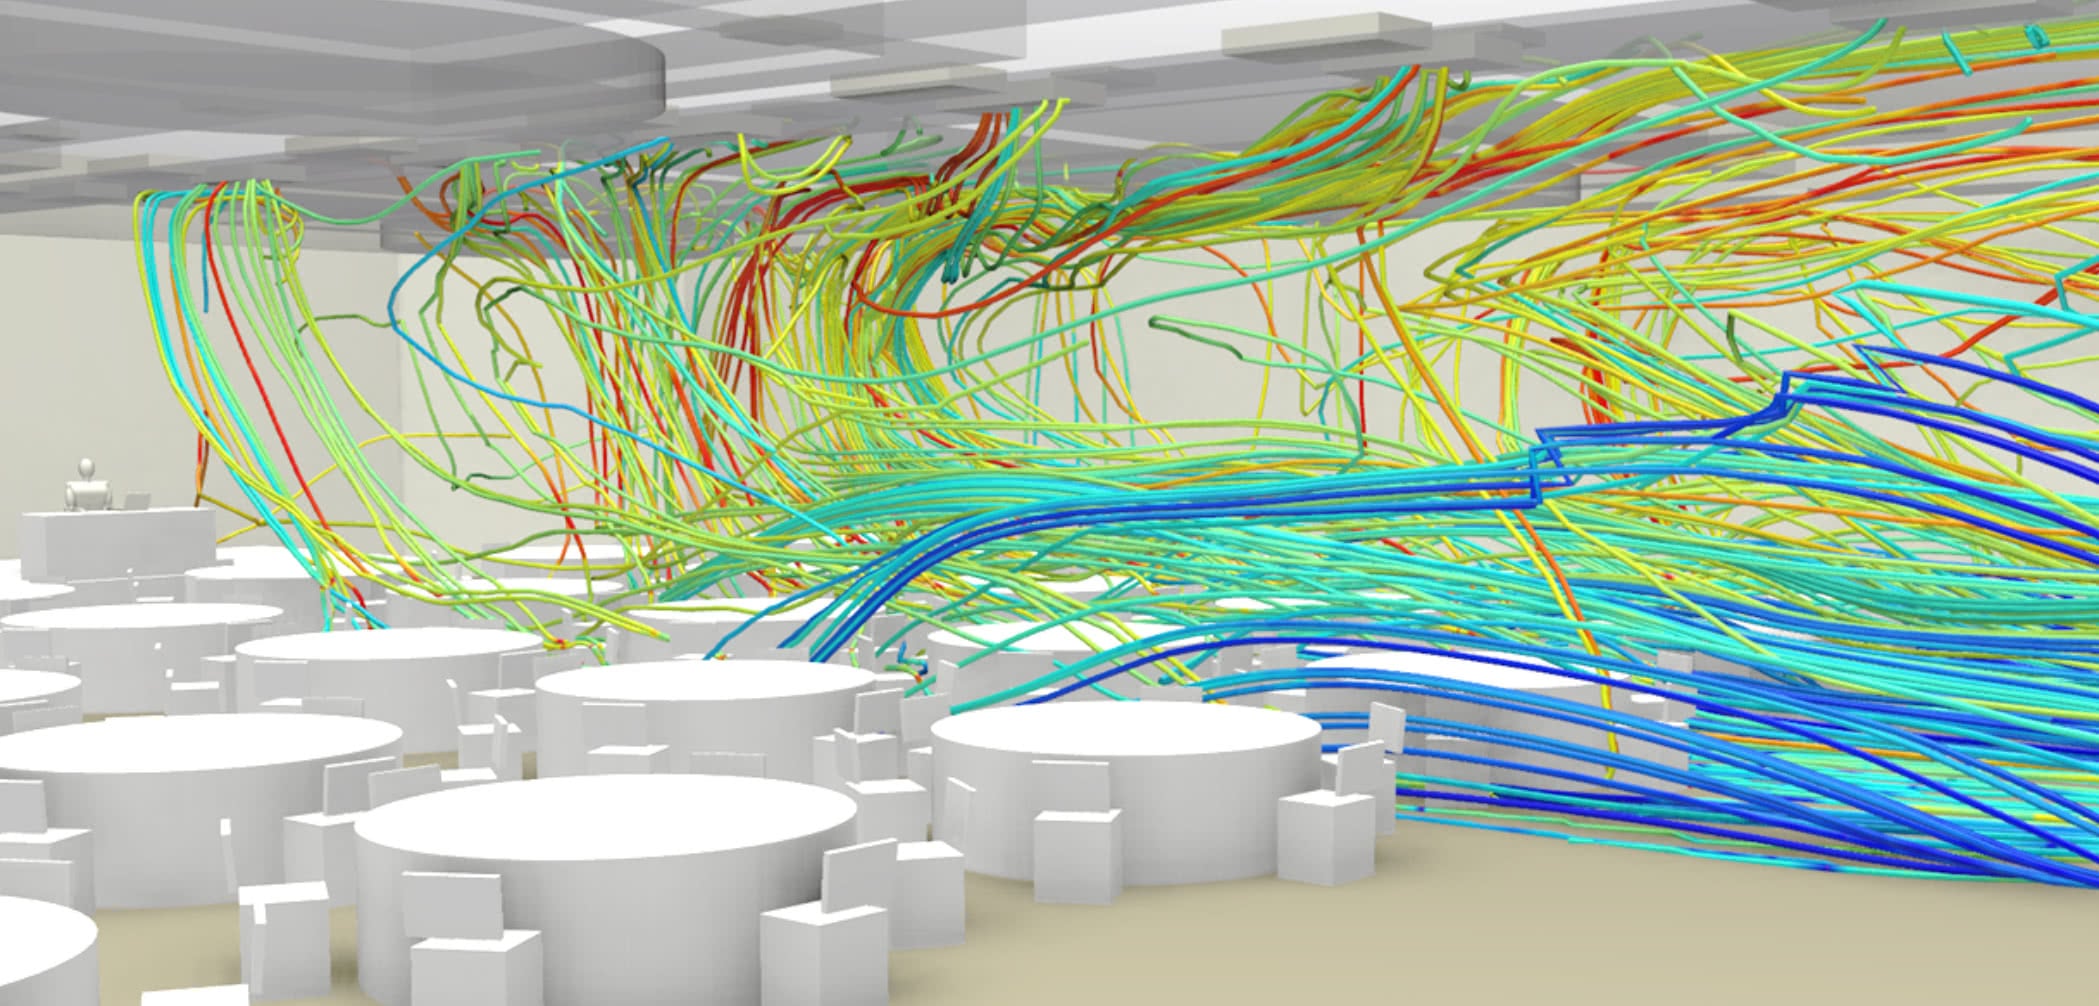 Rendering of airflow in a conference room.